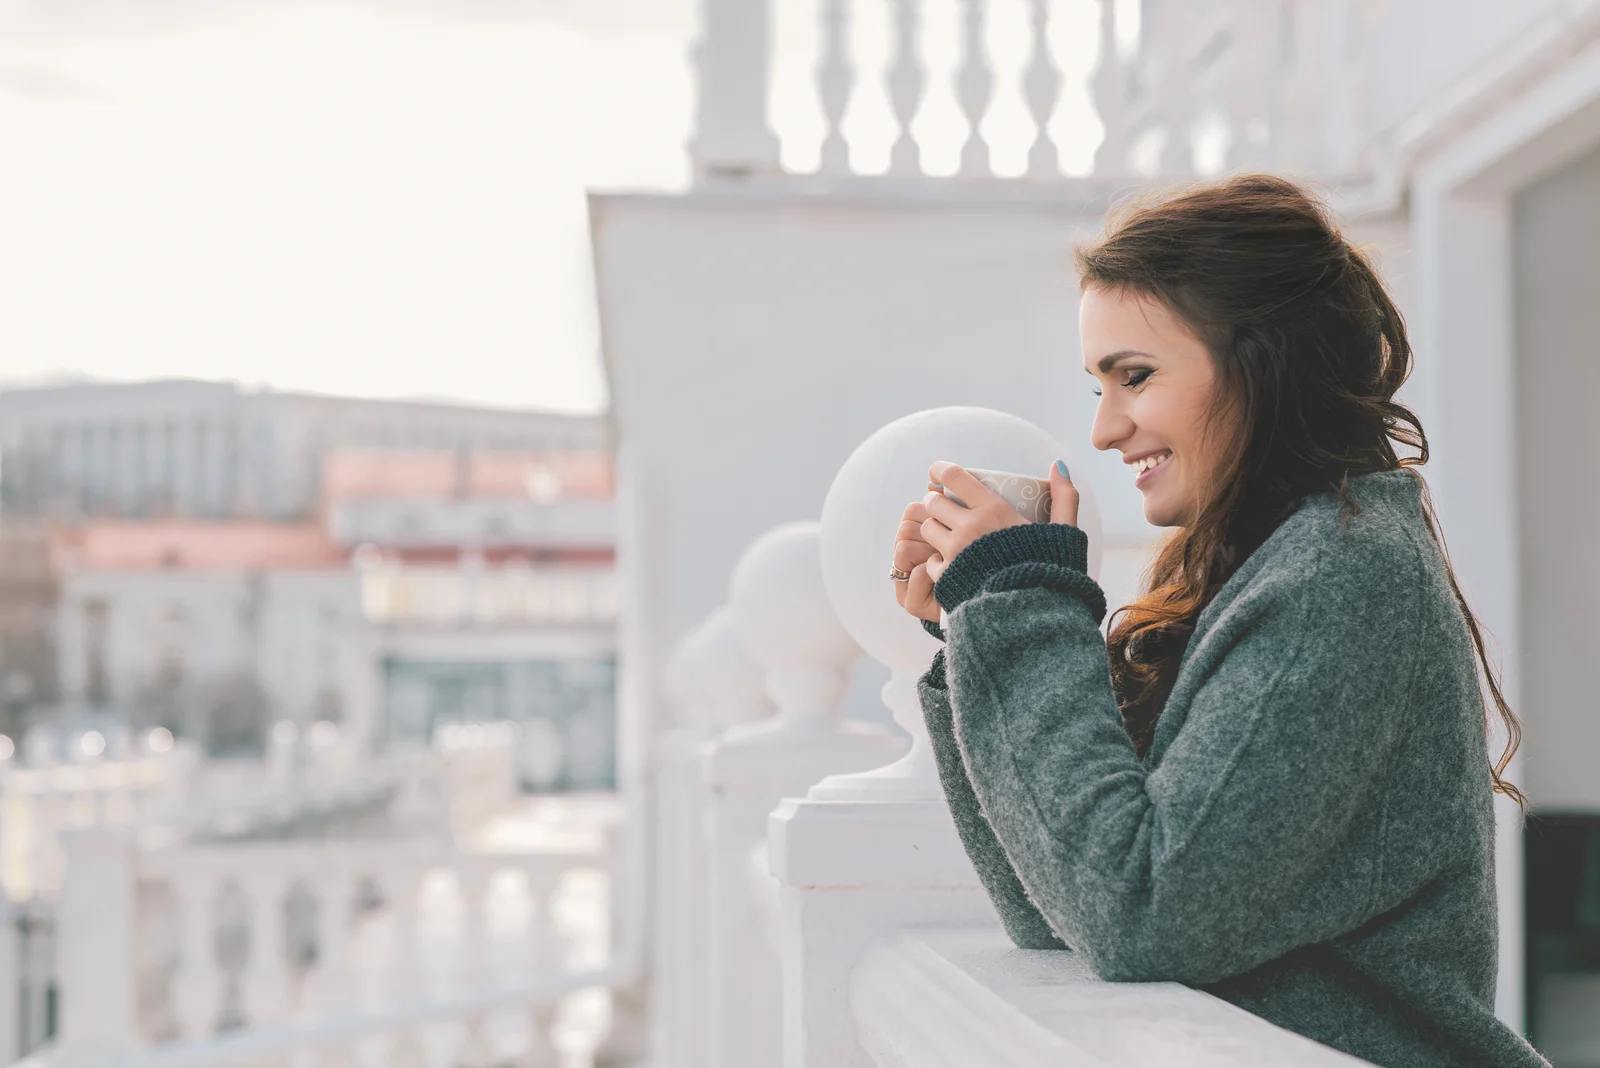 a smiling woman stands on the balcony with a salt shaker in her hand